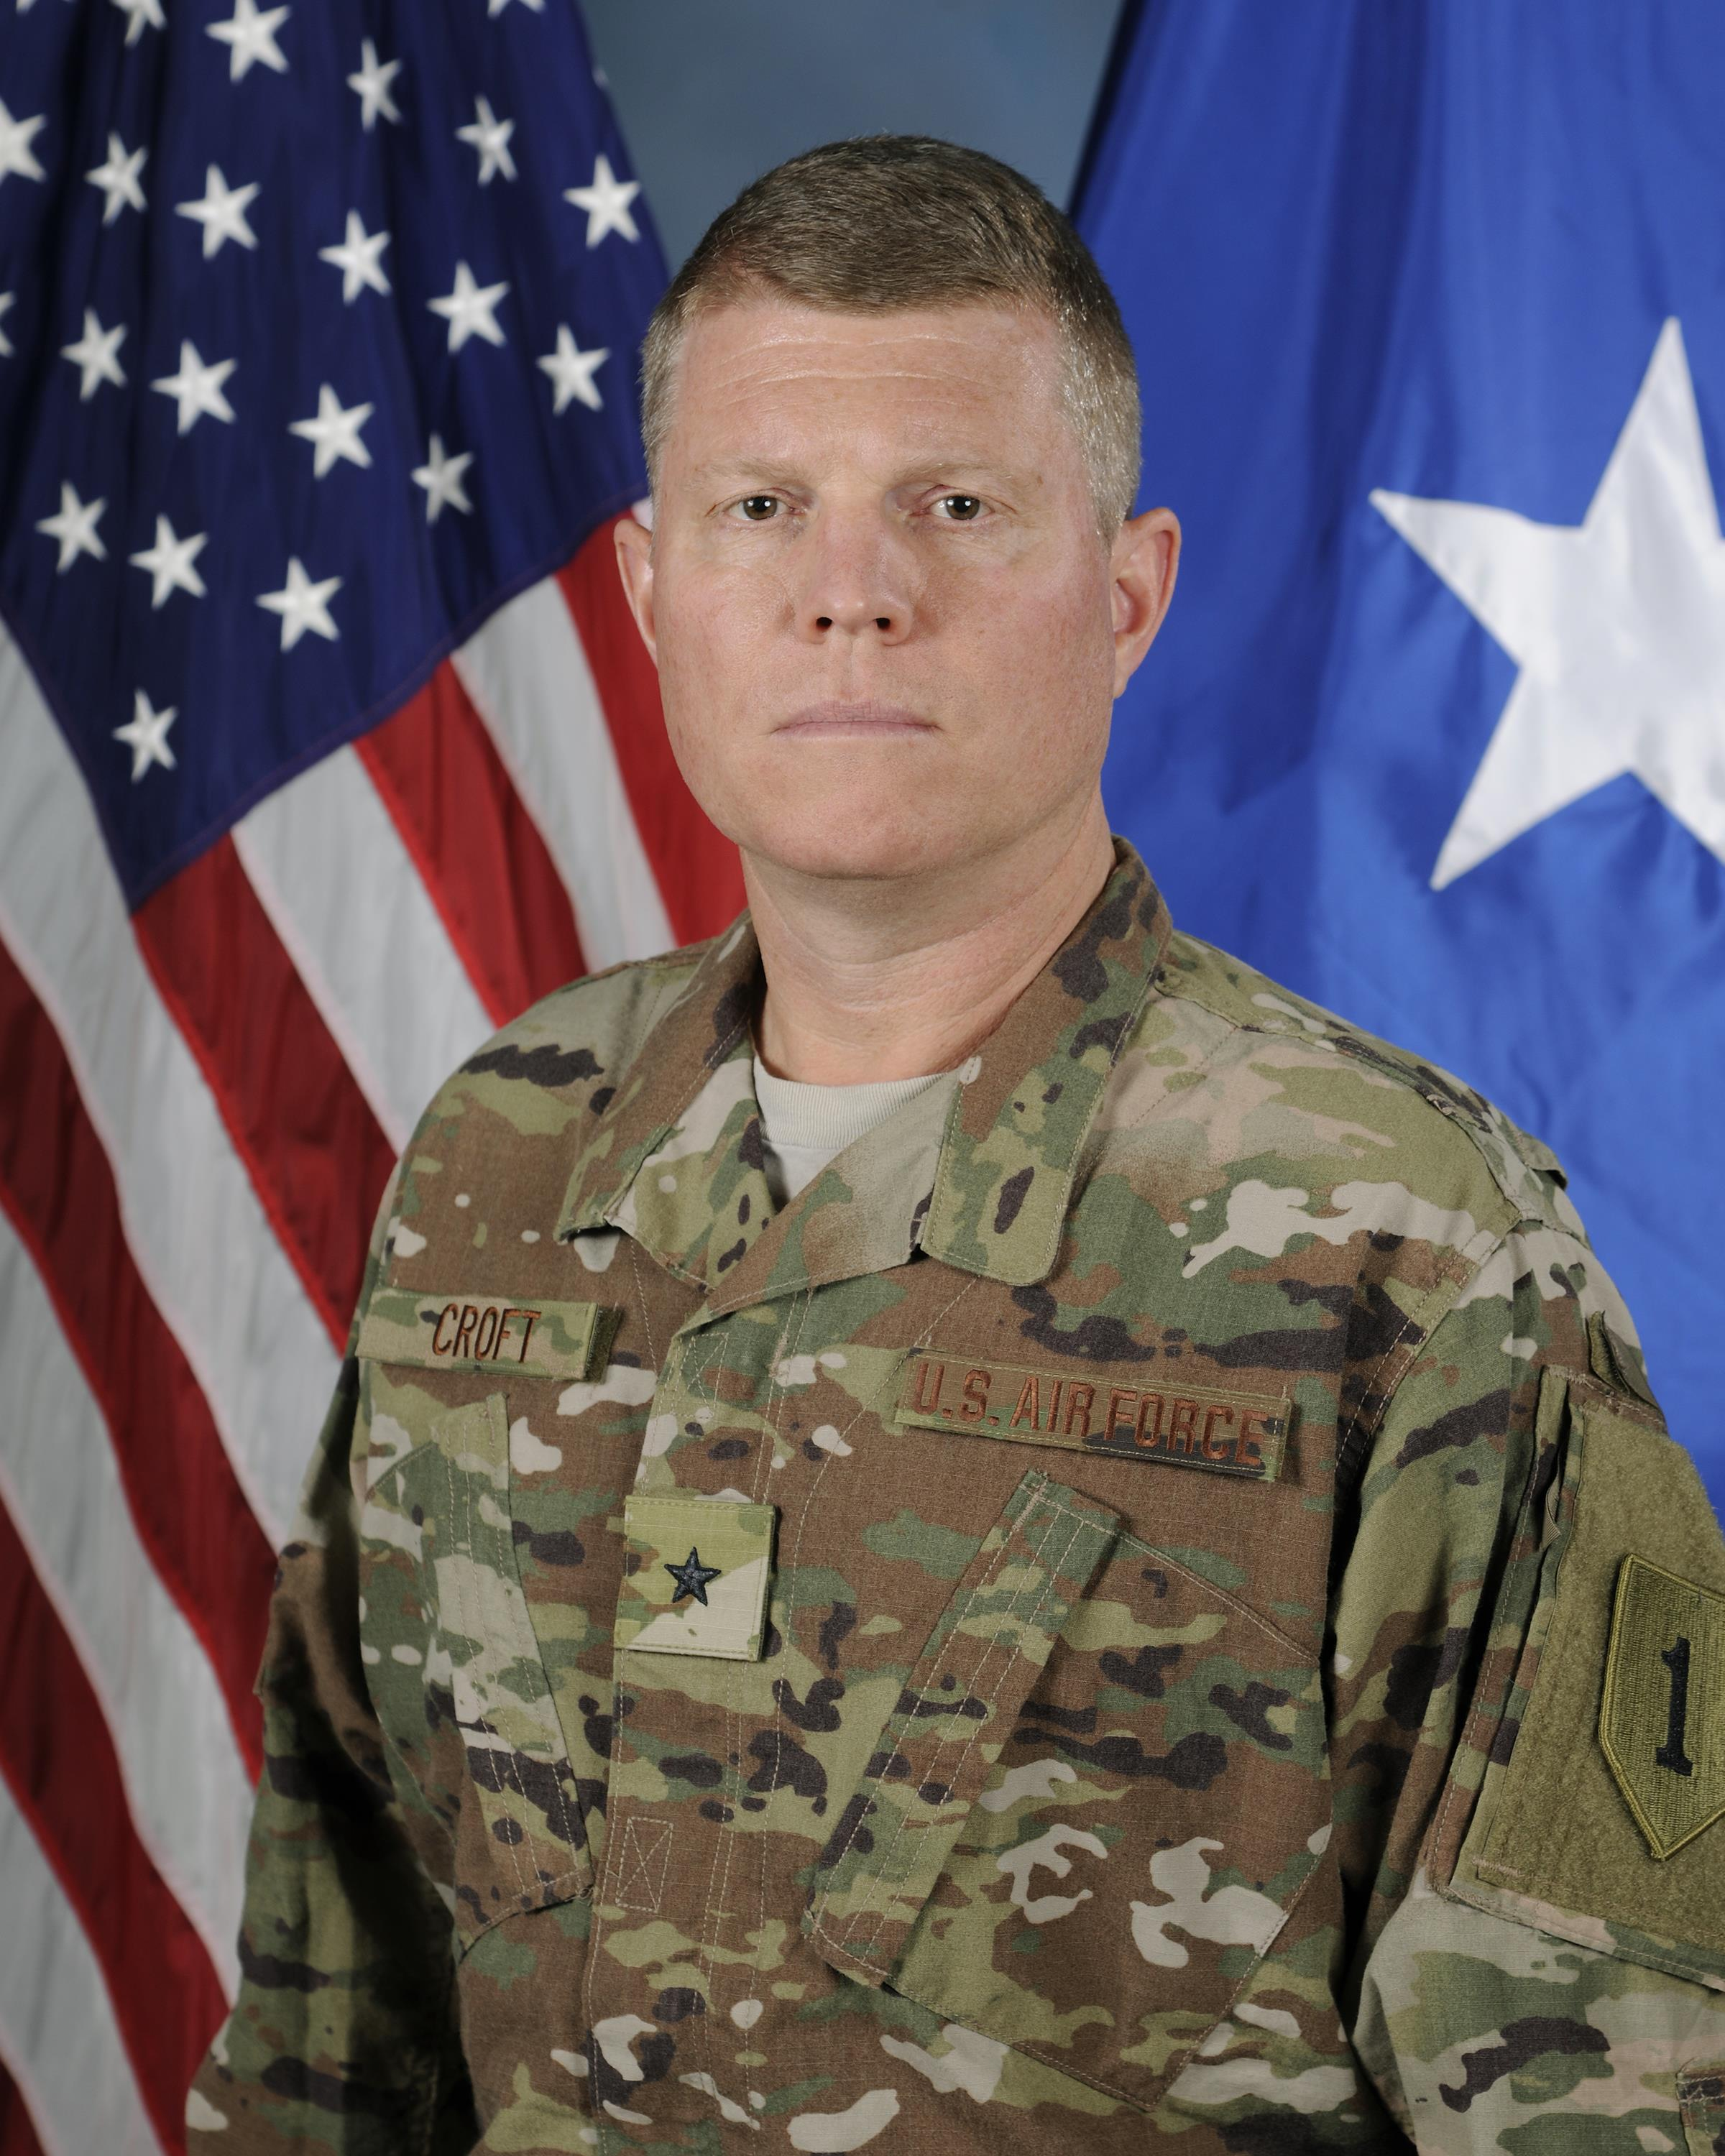 Brig. Gen. Andrew A. Croft is the deputy commanding general of the US-led coalition against ISIS in Iraq (Credit: US Air Force)